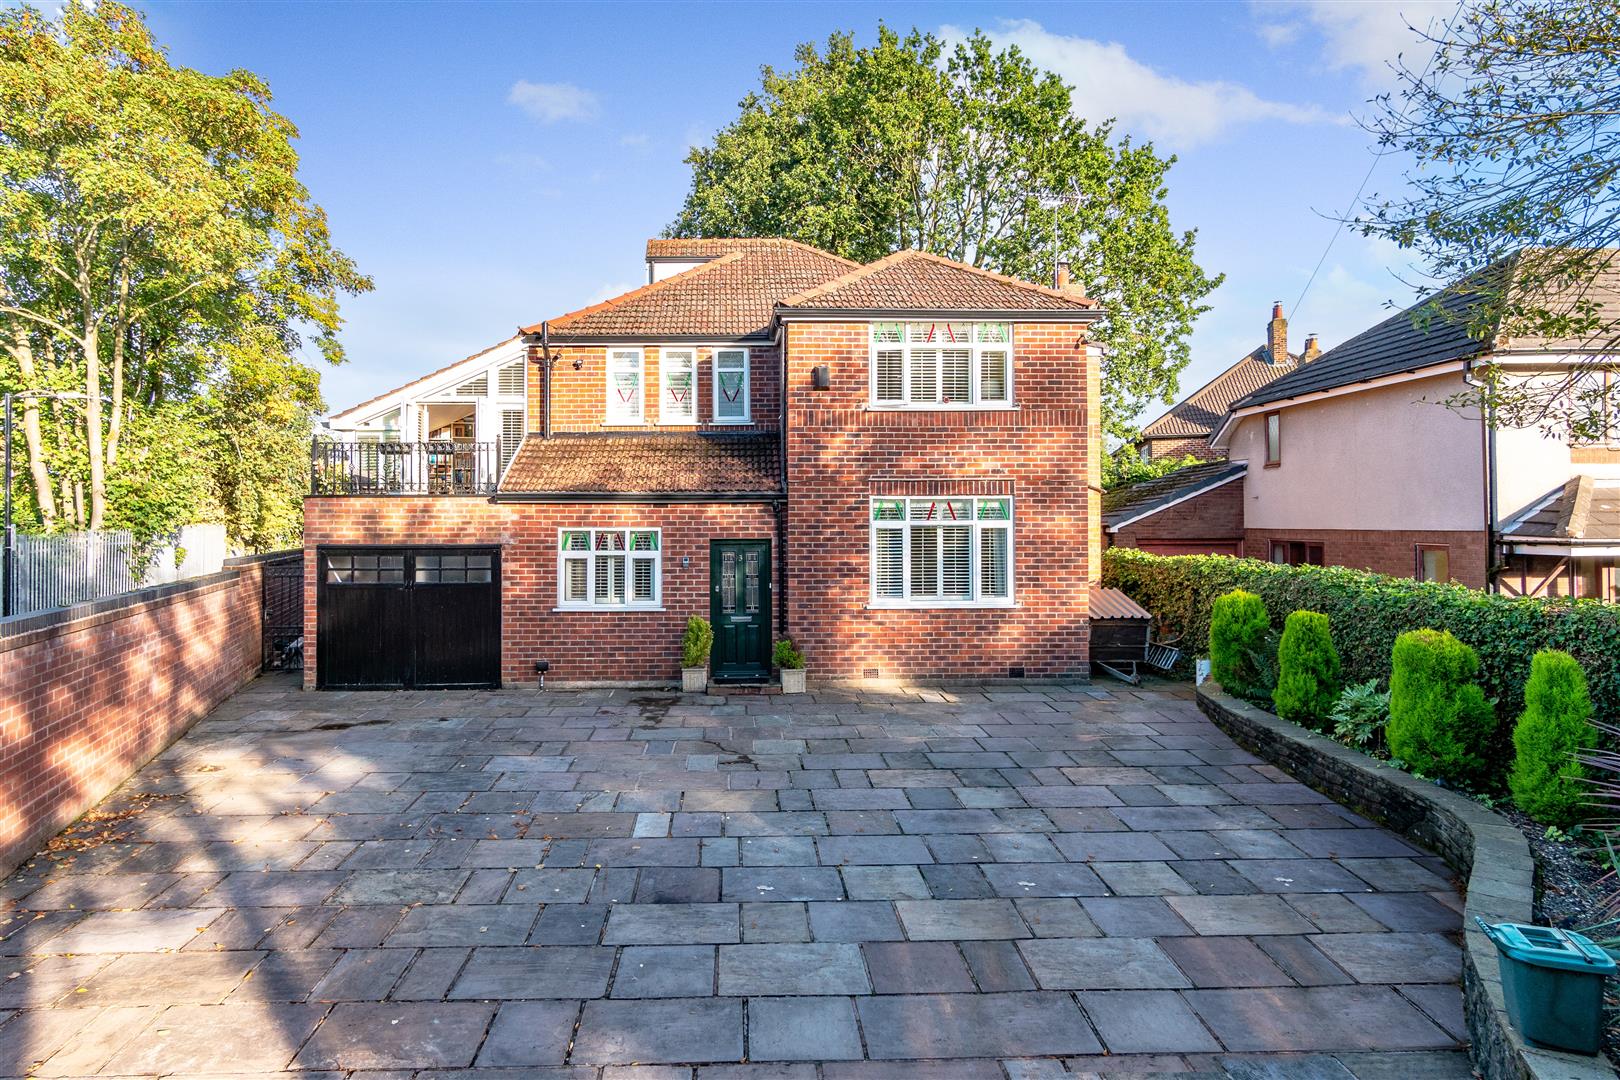 5 bed detached house for sale in Wood Lane, Altrincham  - Property Image 1